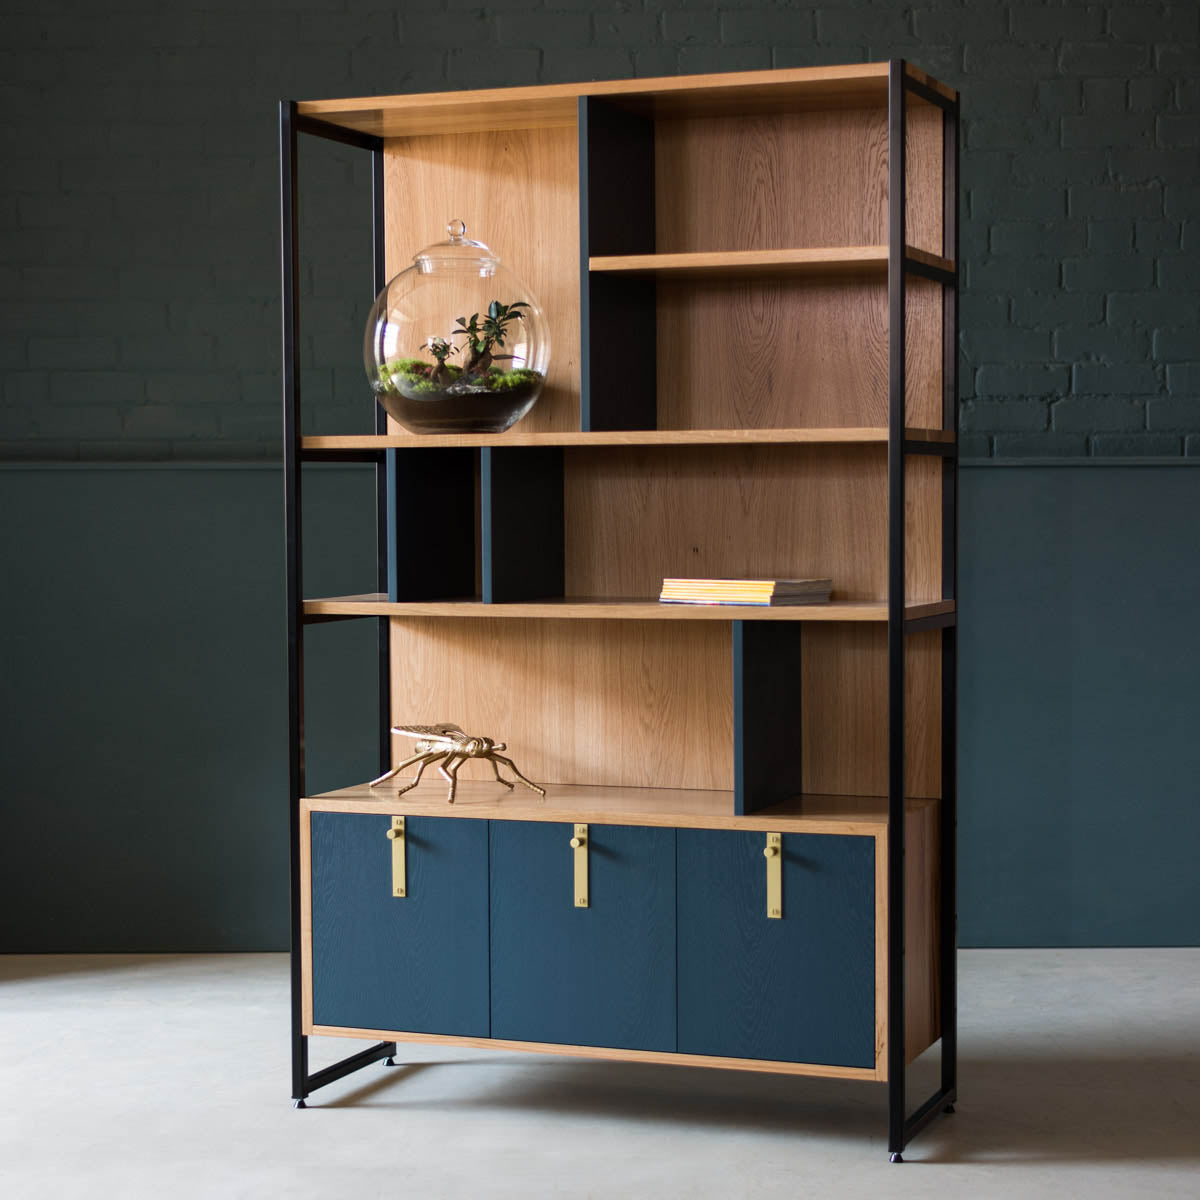 An image of the Oak Shelving Unit, Hague product available from Koda Studios